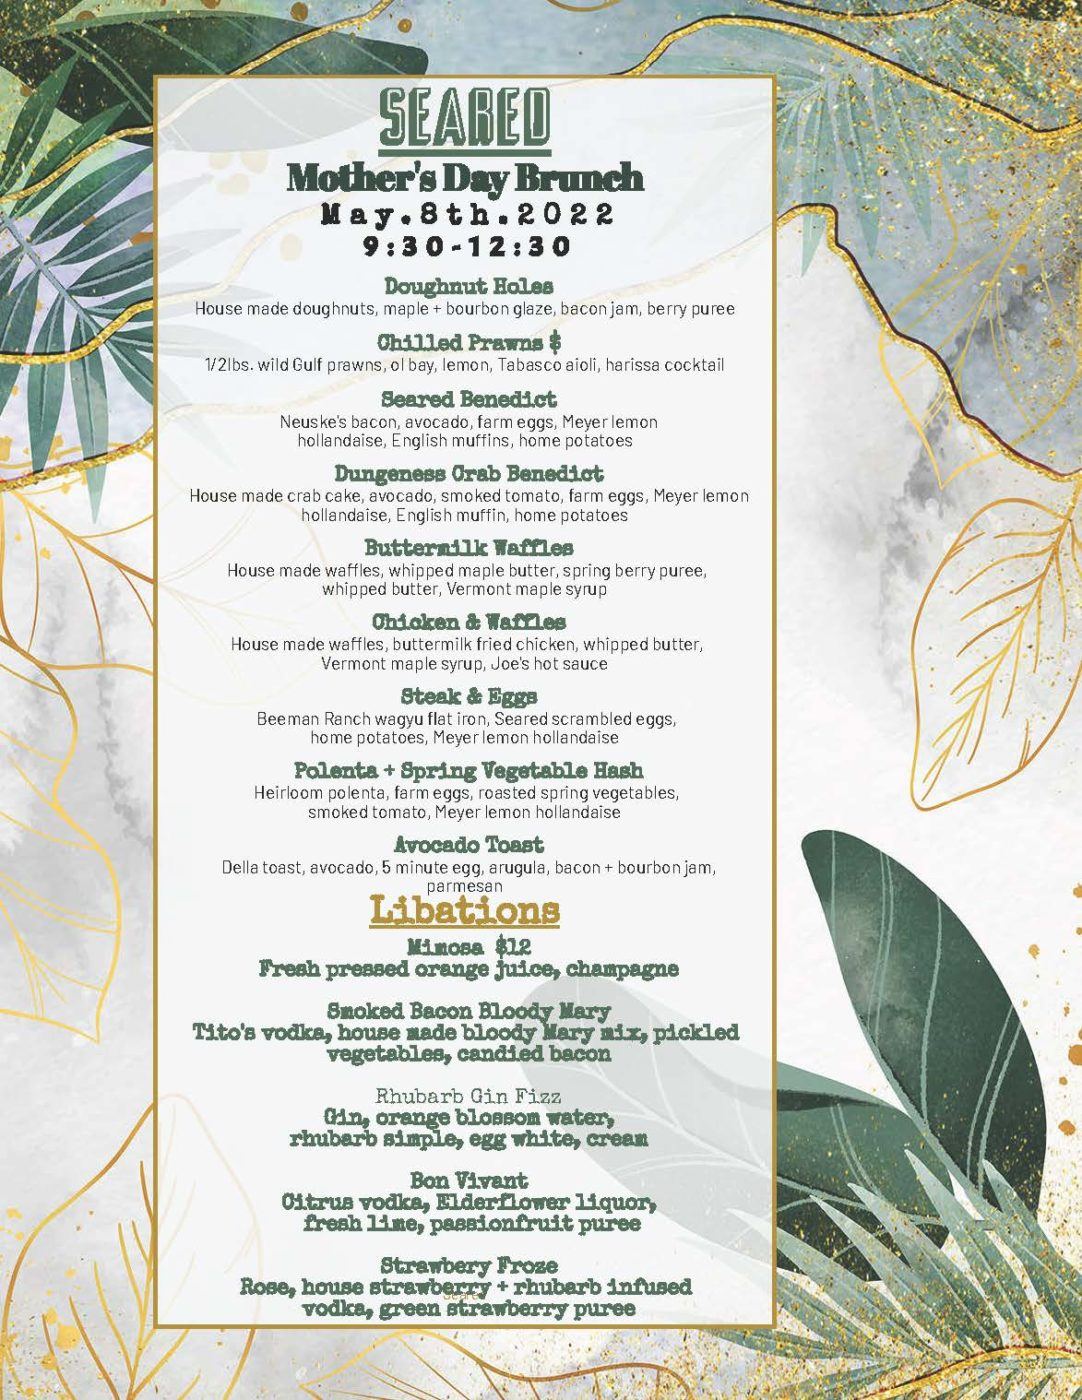 Limited Special Mother's Day Brunch menu available at Seared in Petaluma